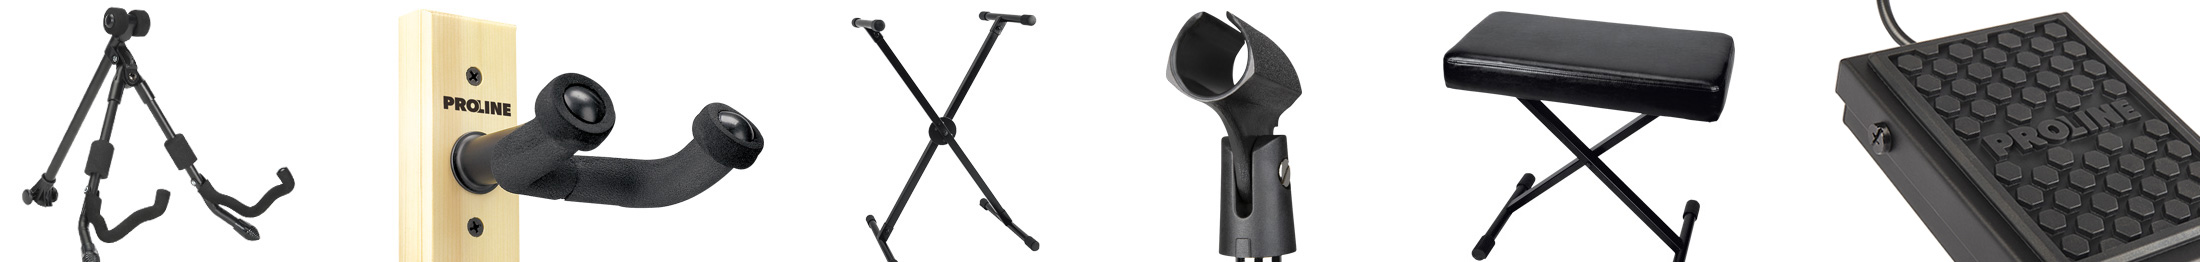 Proline Microphone Stands